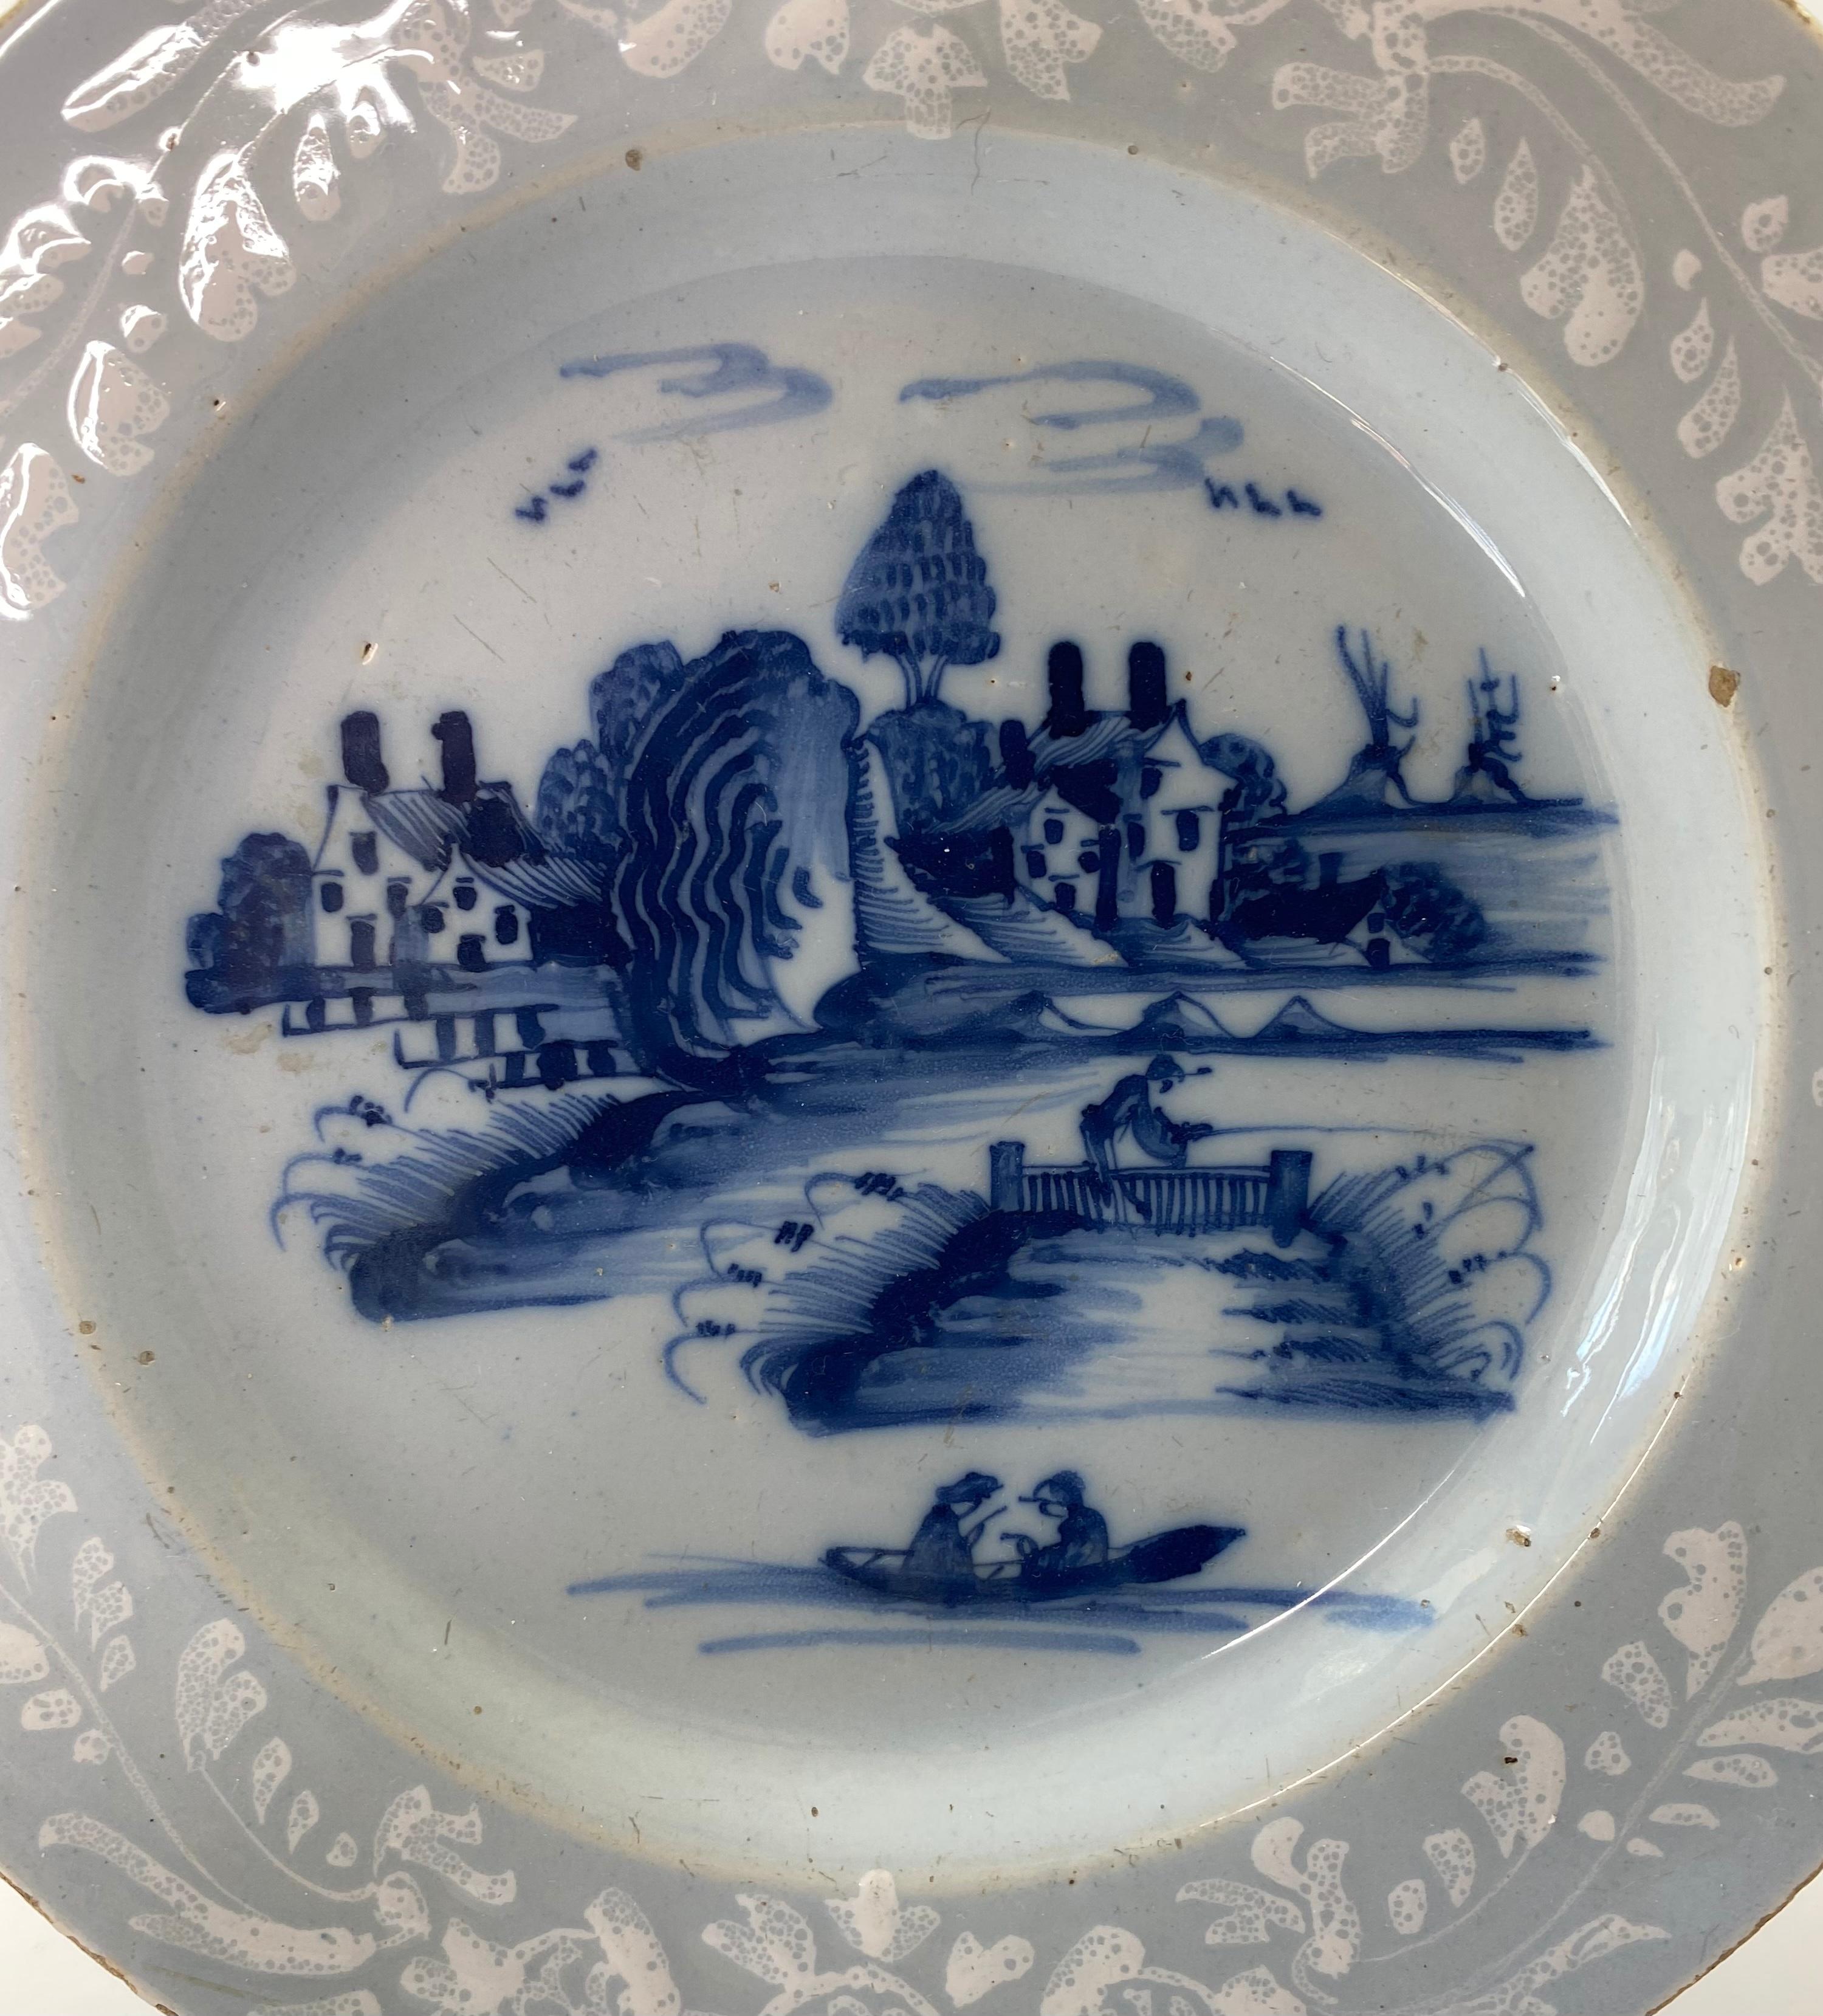 Bristol delft ‘Bianco sopra Bianco’ dish, Redcliff Back, Richard Frank’s factory, c. 1760. Painted to the centre in underglaze blue, with a scene of fishermen, in a European landscape. Within a border, enamelled in white with stylised floral